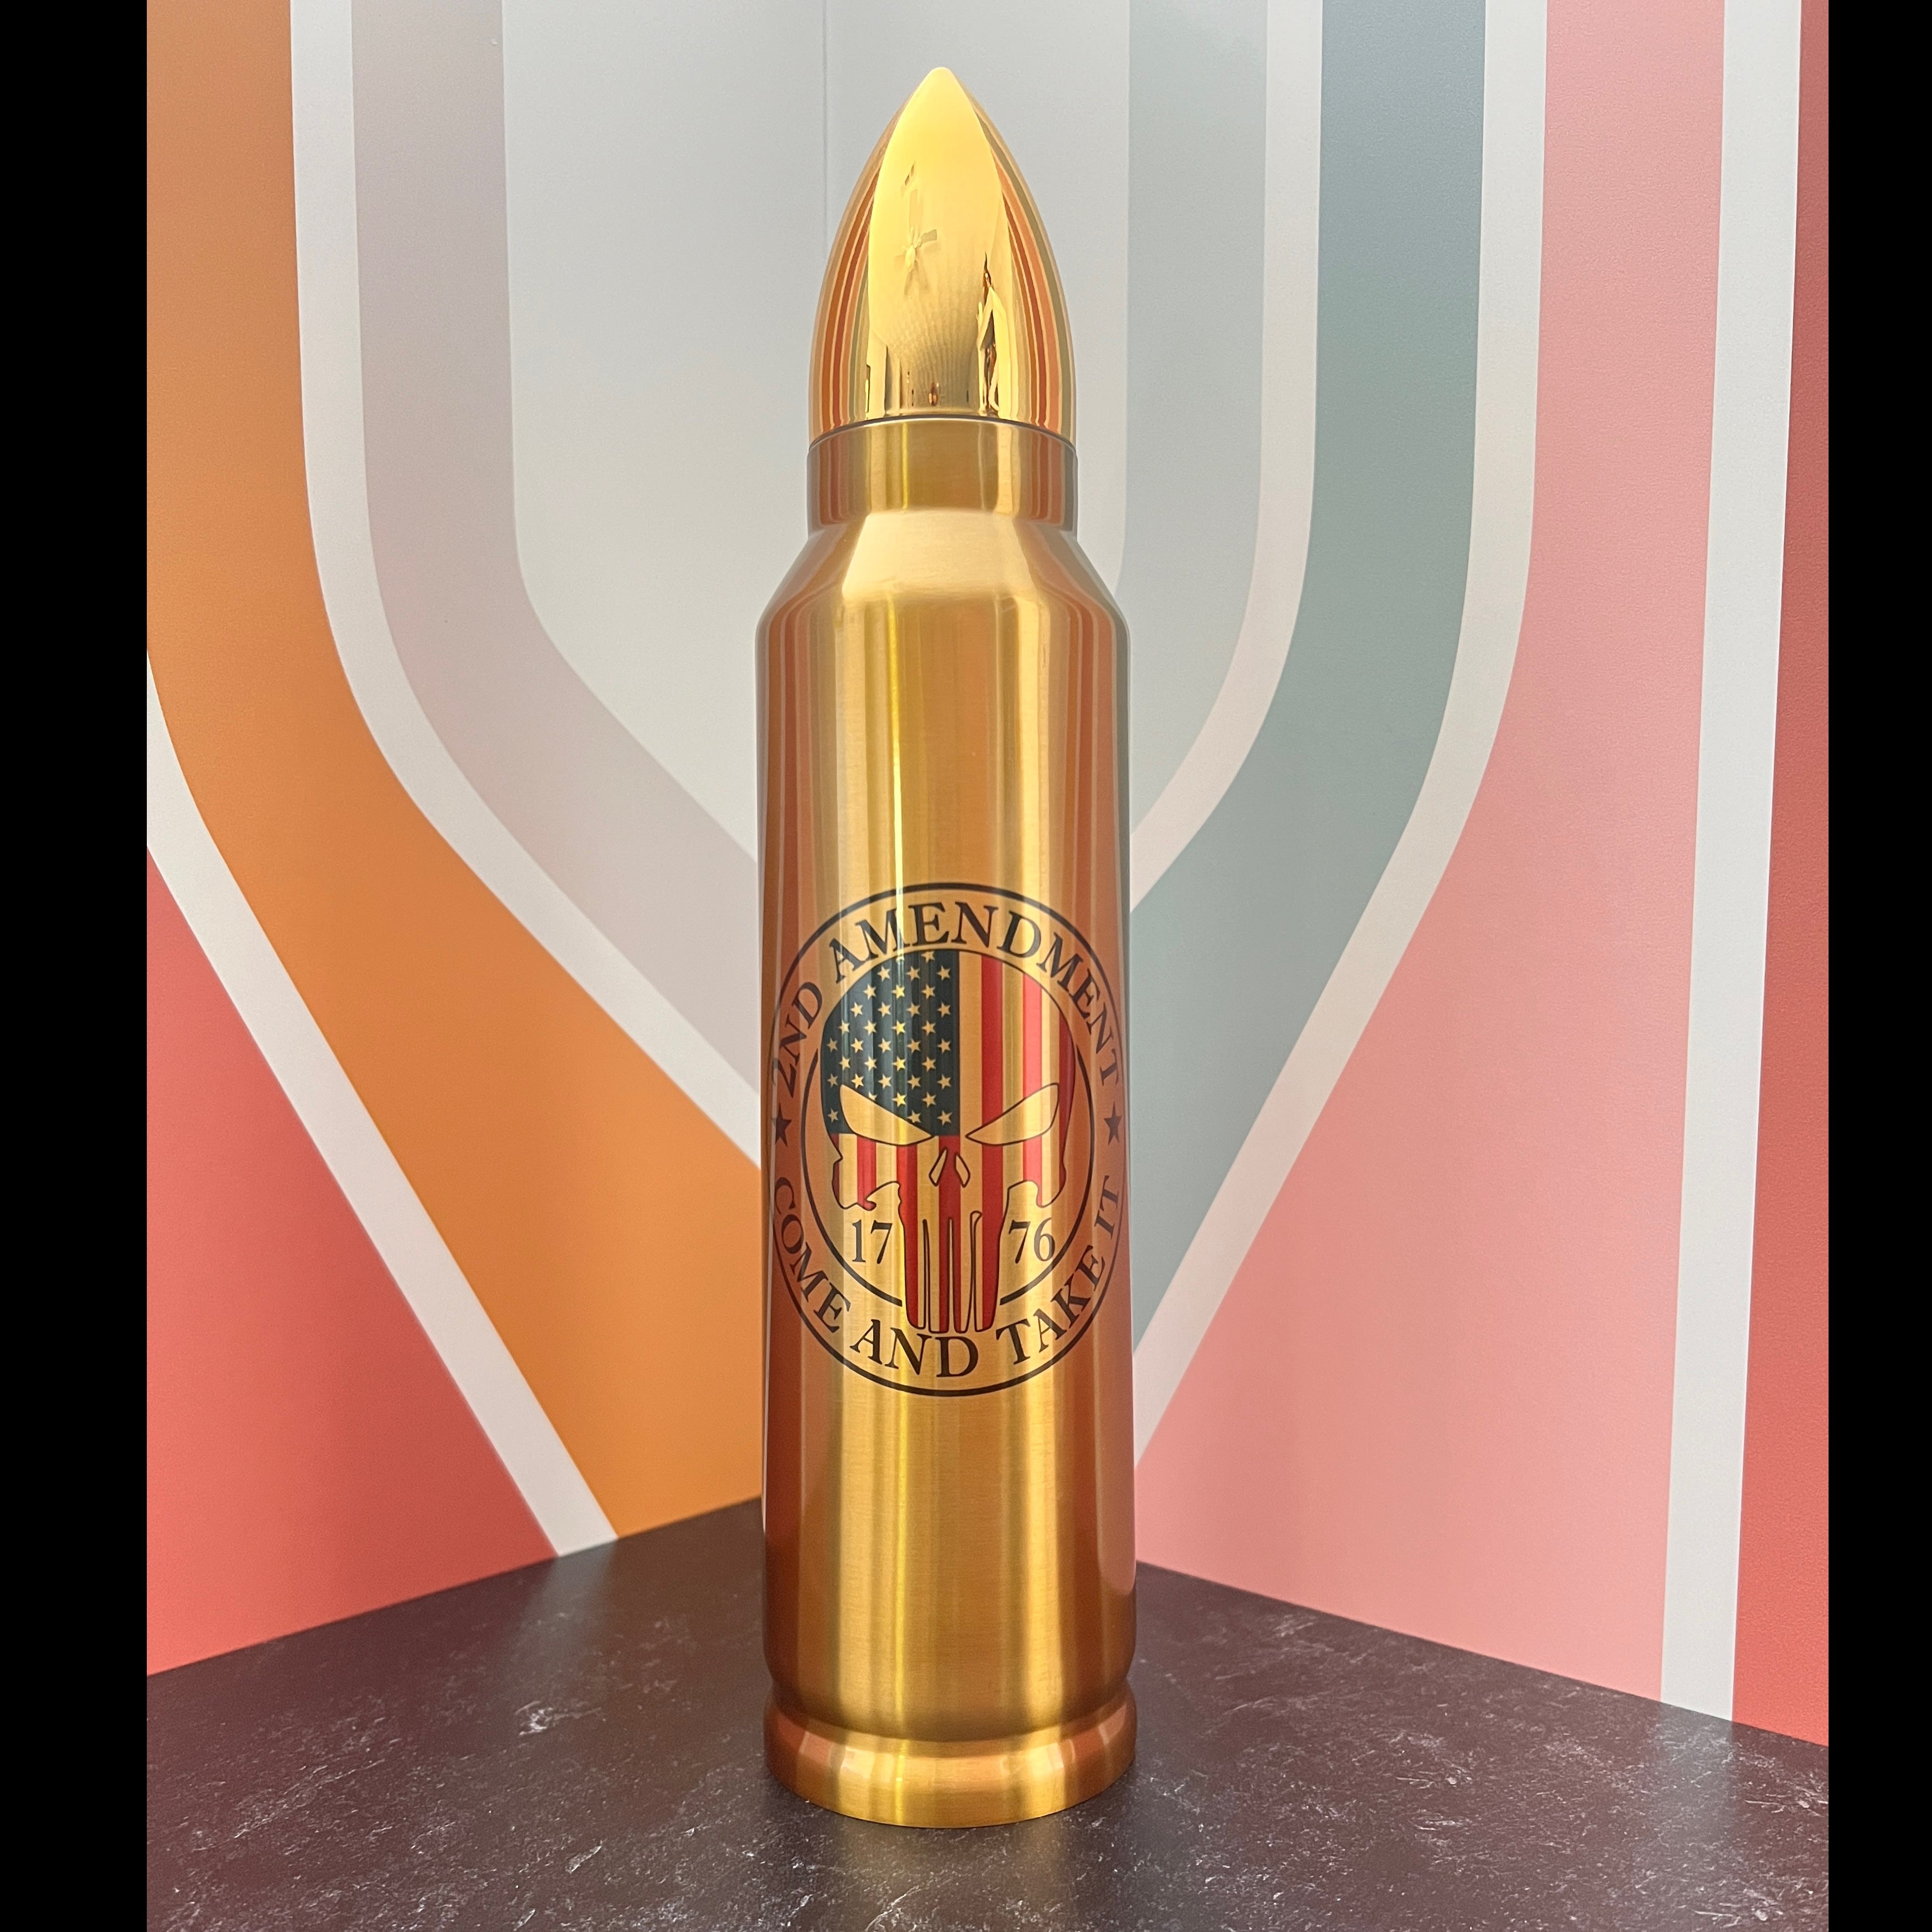 Bullet Shaped Stainless Steel 32 Oz 2nd Amendment Water Bottle